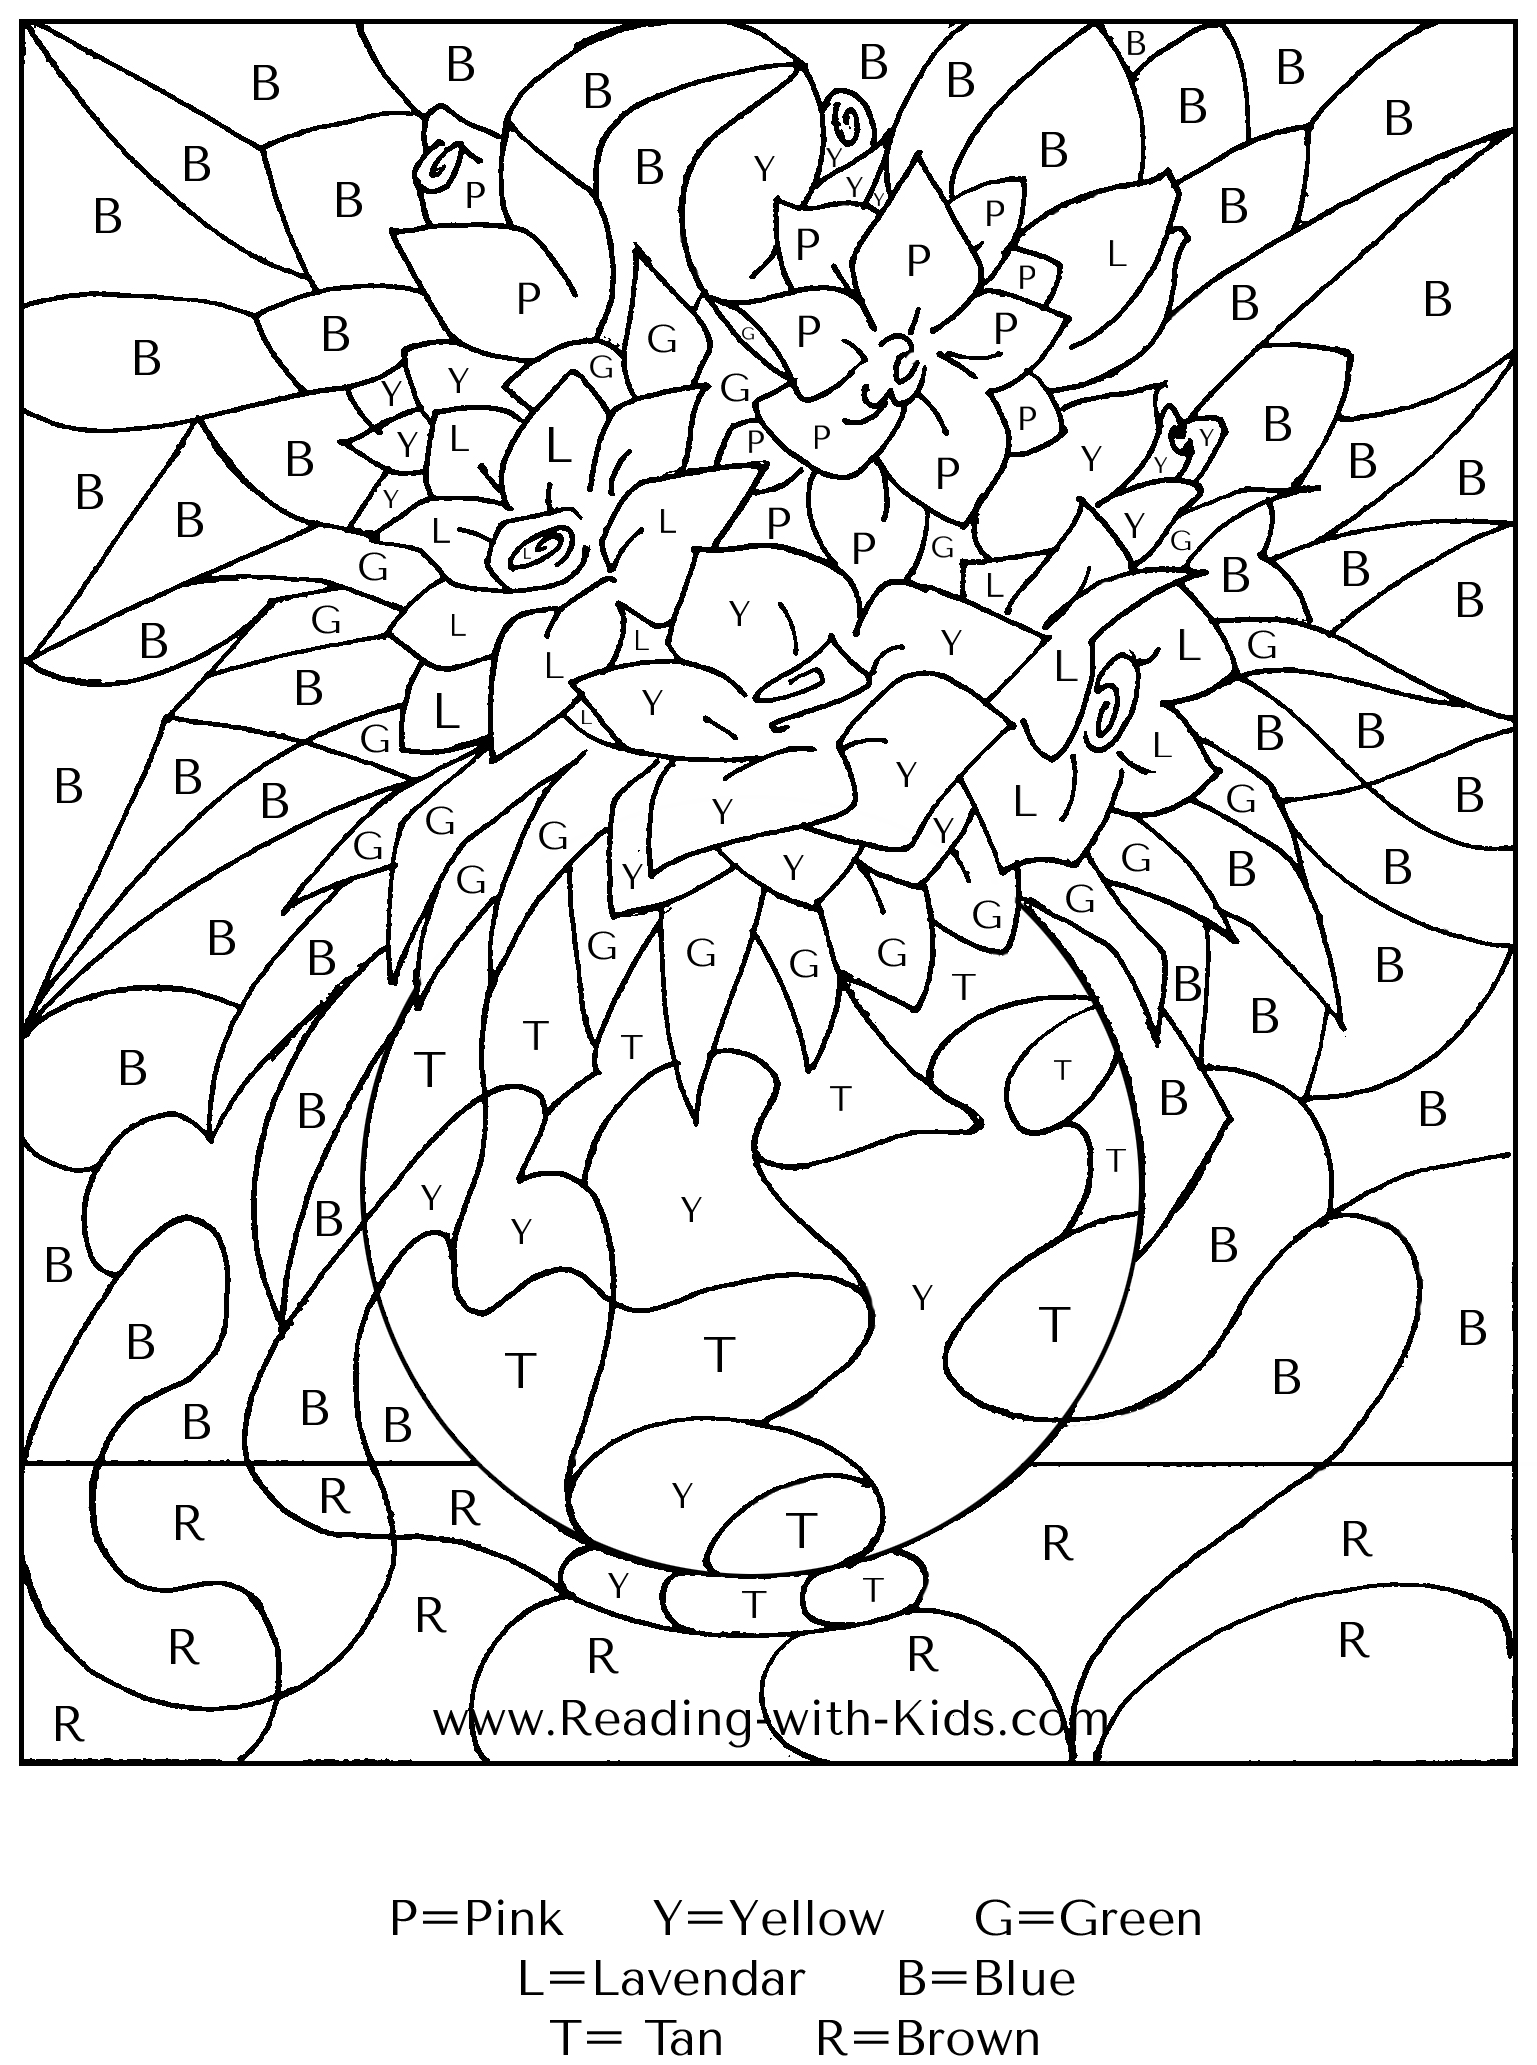 pin-by-fiona-rashad-on-arts-and-crafts-in-2020-abstract-coloring-pages-adult-color-by-number